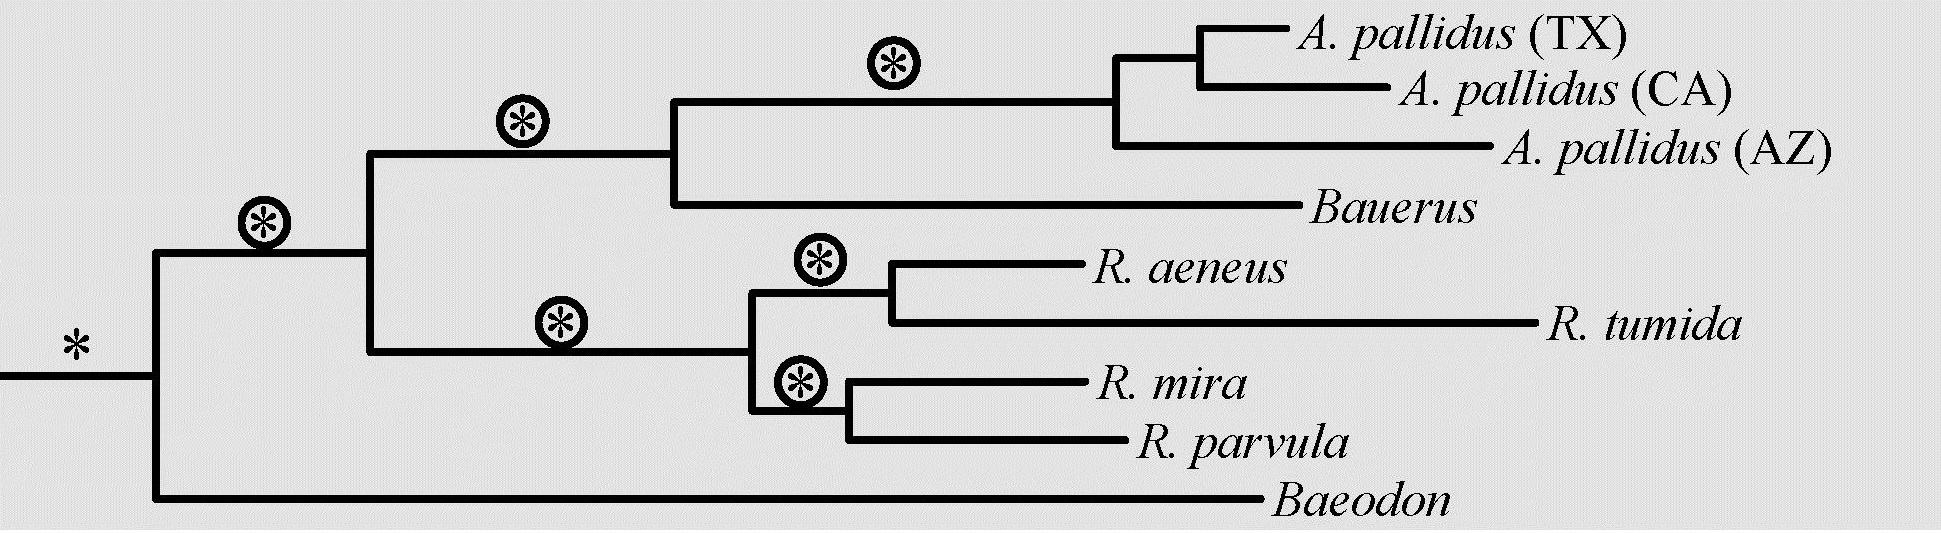 Phylogenetic tree of the antrozoini clade taken from a phylogram of order Chiroptera.